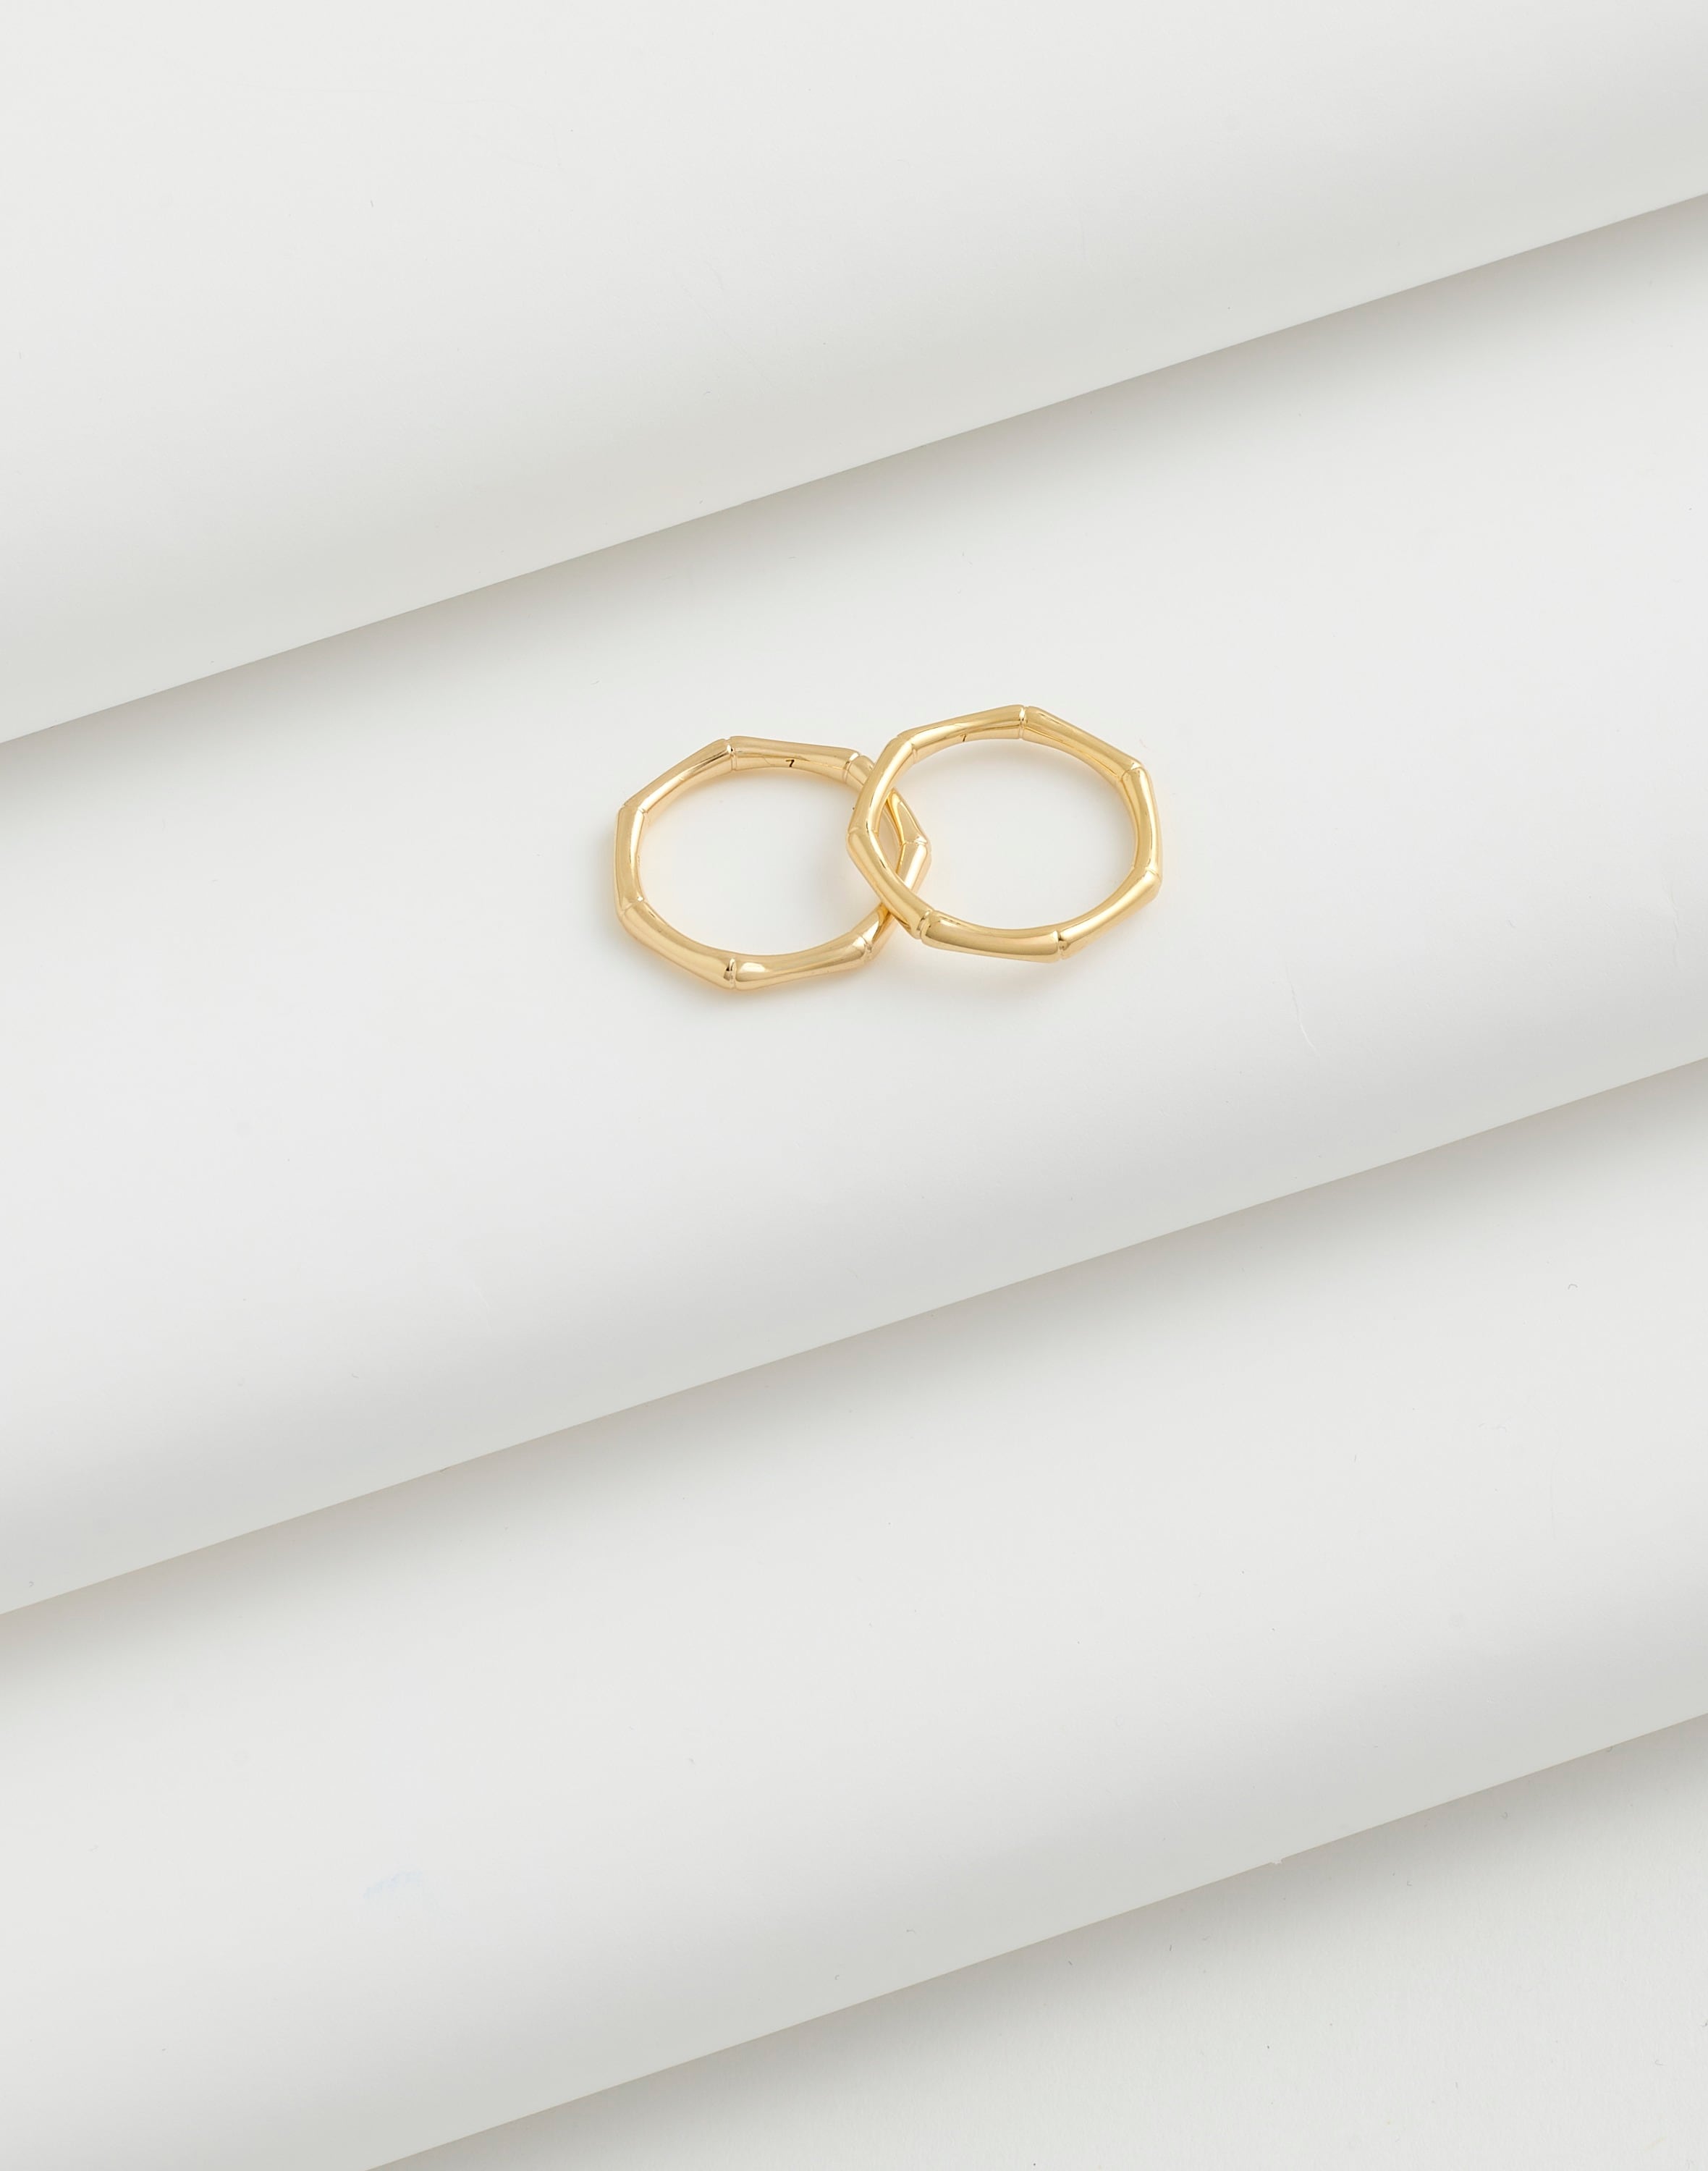 Mw Demi-fine Bamboo Stacking Ring Set In 14k Gold